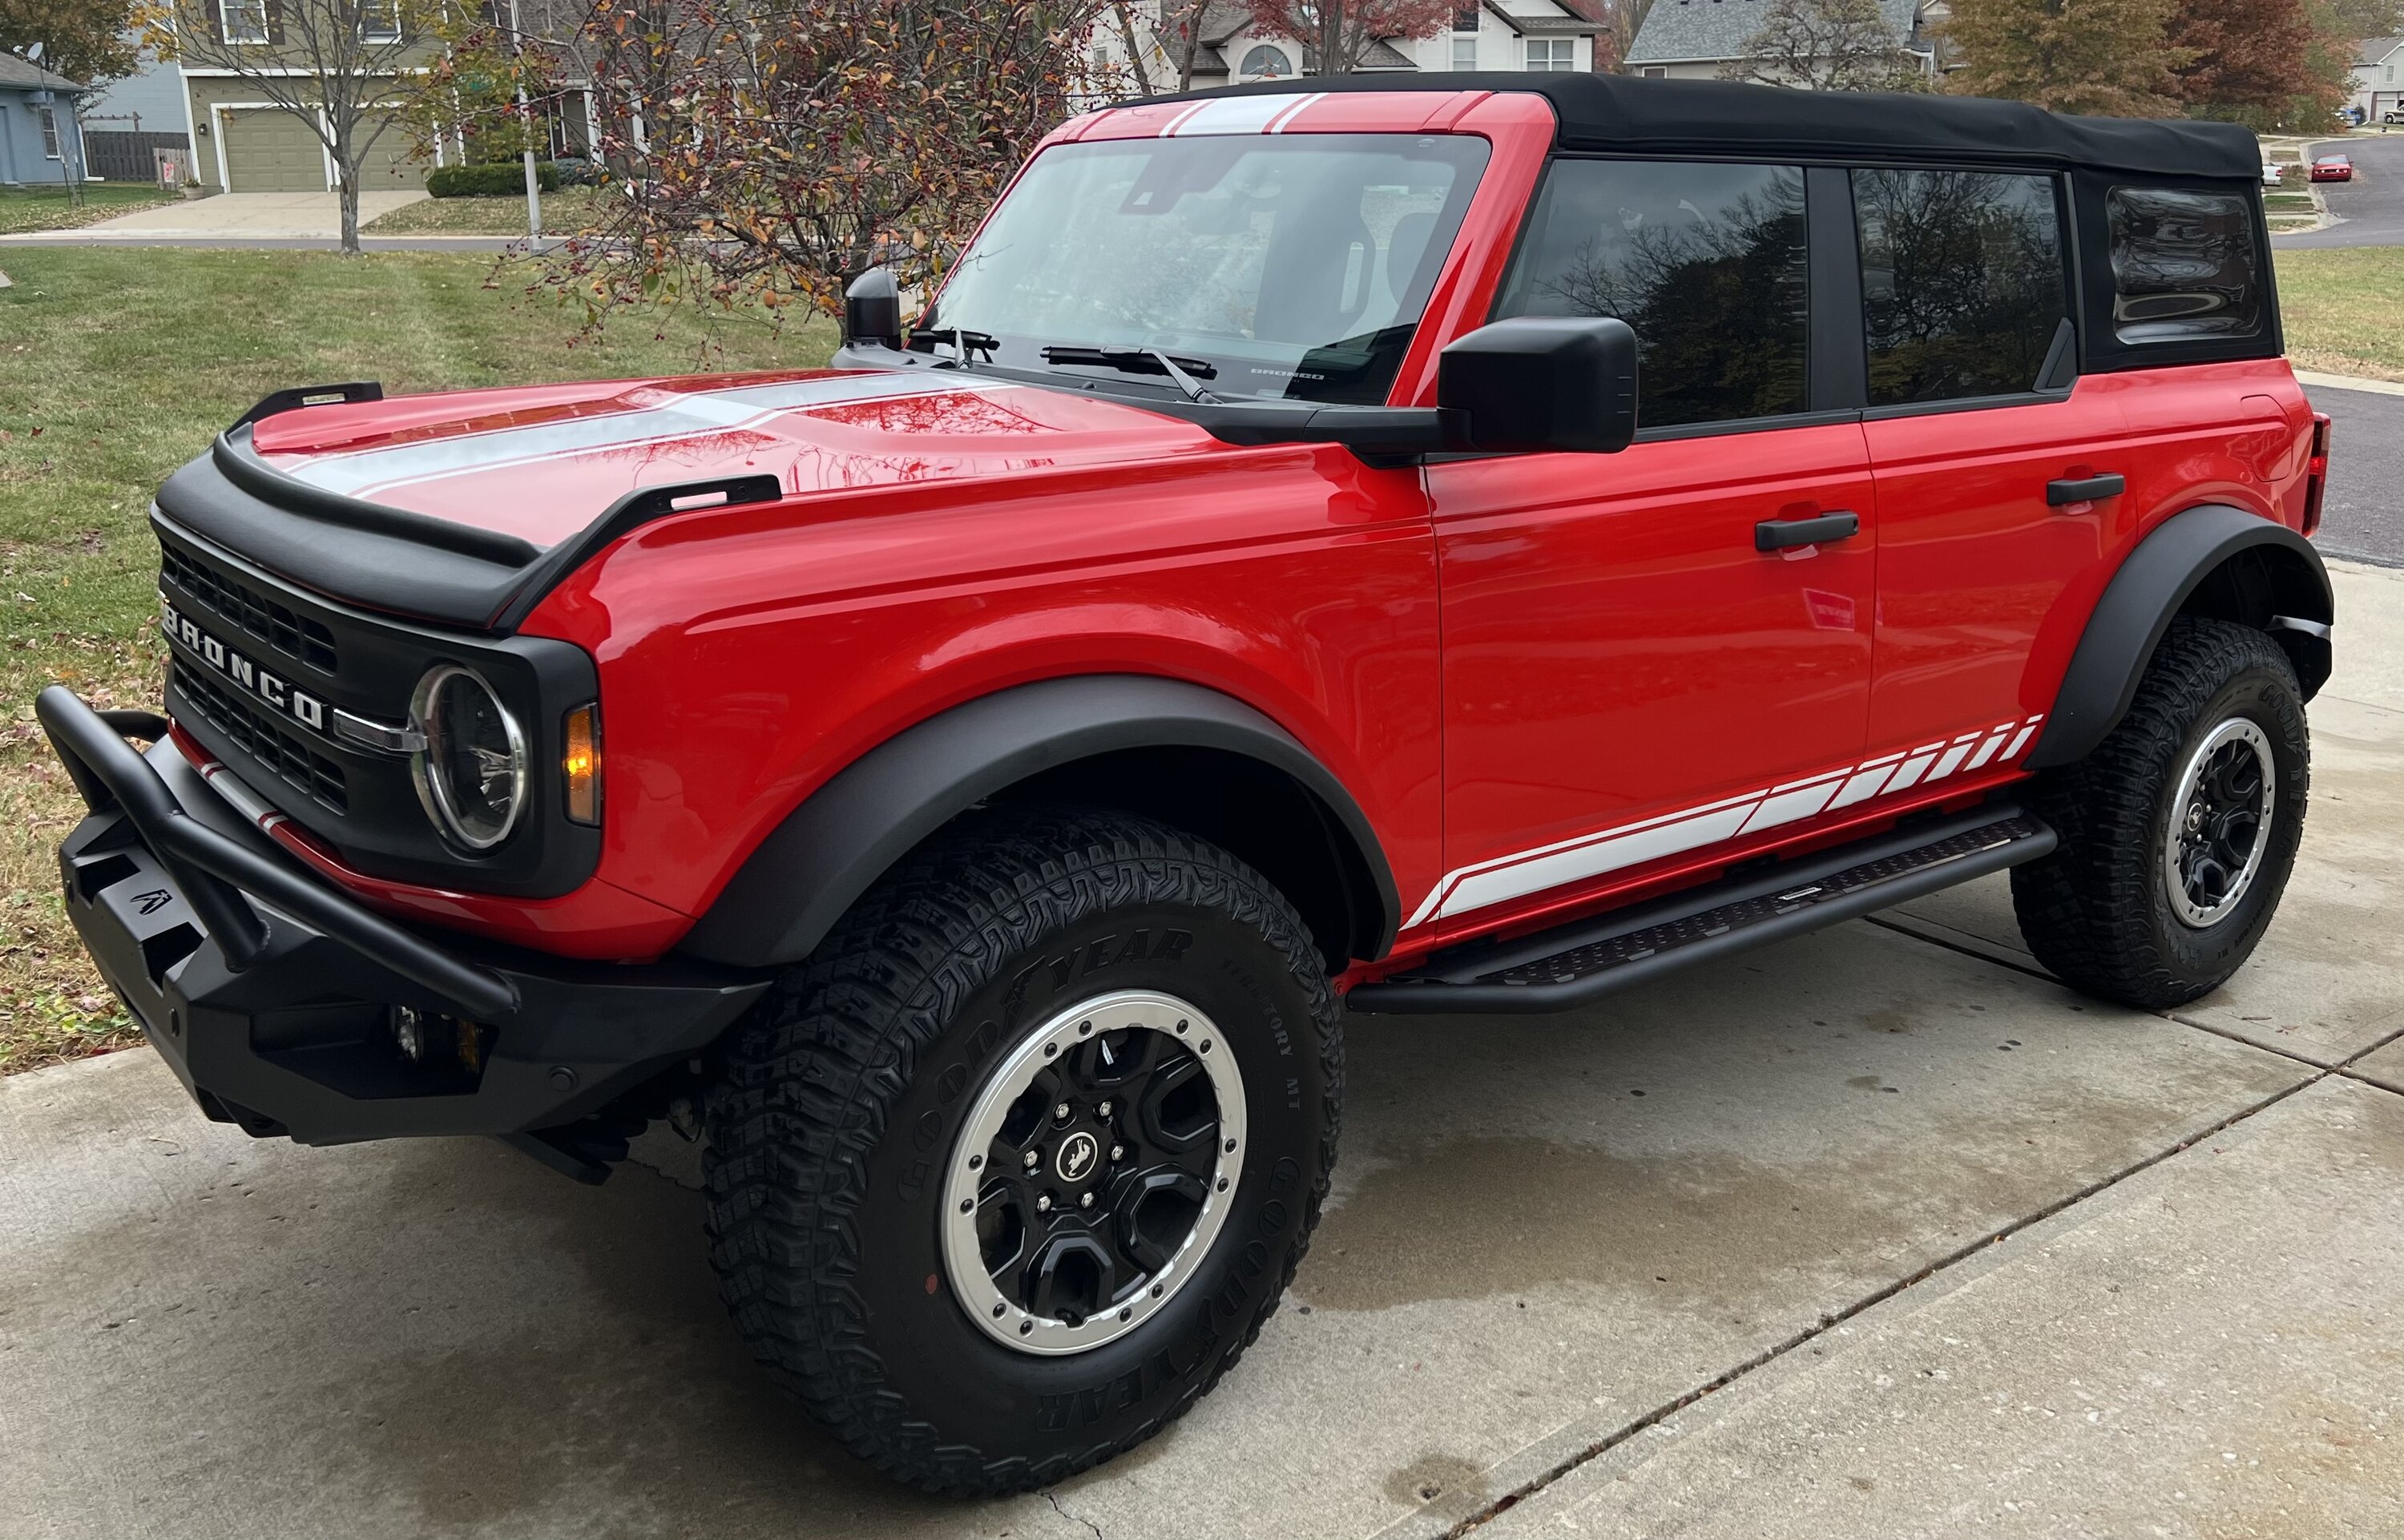 Ford Bronco InTheShift’s Base Sasquatch Race Red Build w/ Racing Stripes Bronco Charlevoix